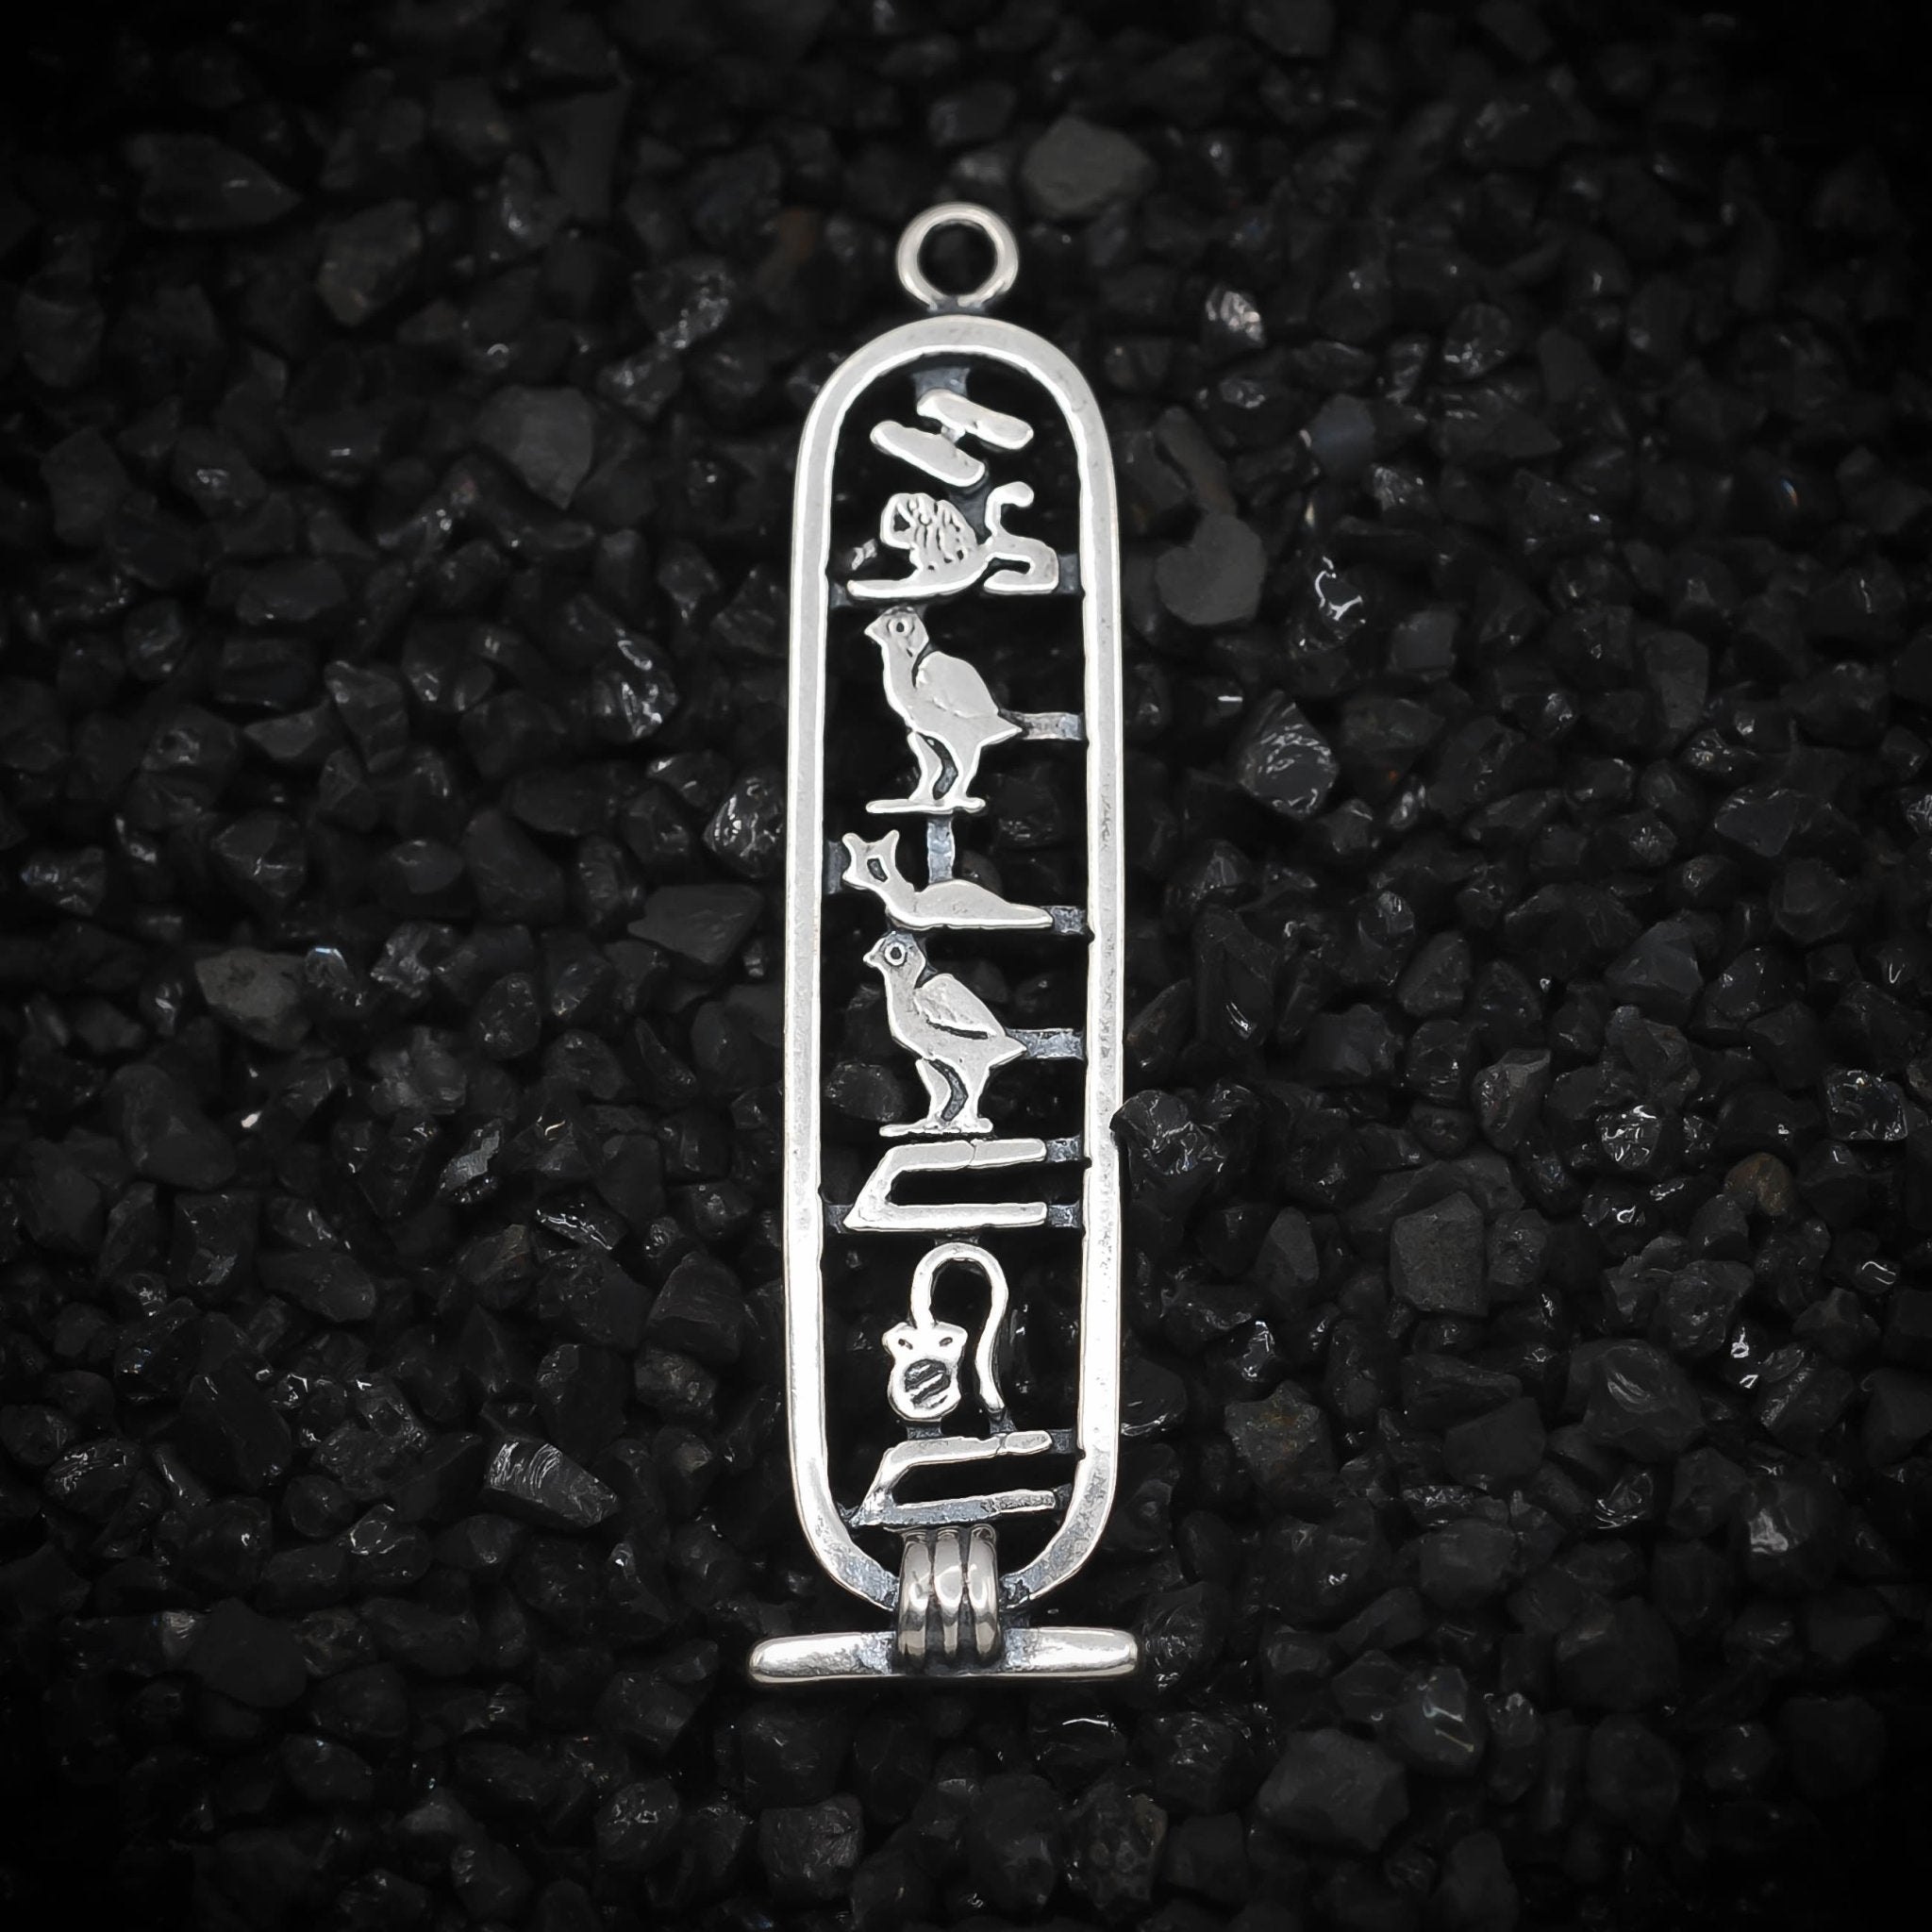 "I Love You Mom" Cartouche Hieroglyph Ancient Egyptian Charm | 925 Sterling Silver, Oxidized or 18K Gold Plated | Jewelry Making Pendant - HarperCrown